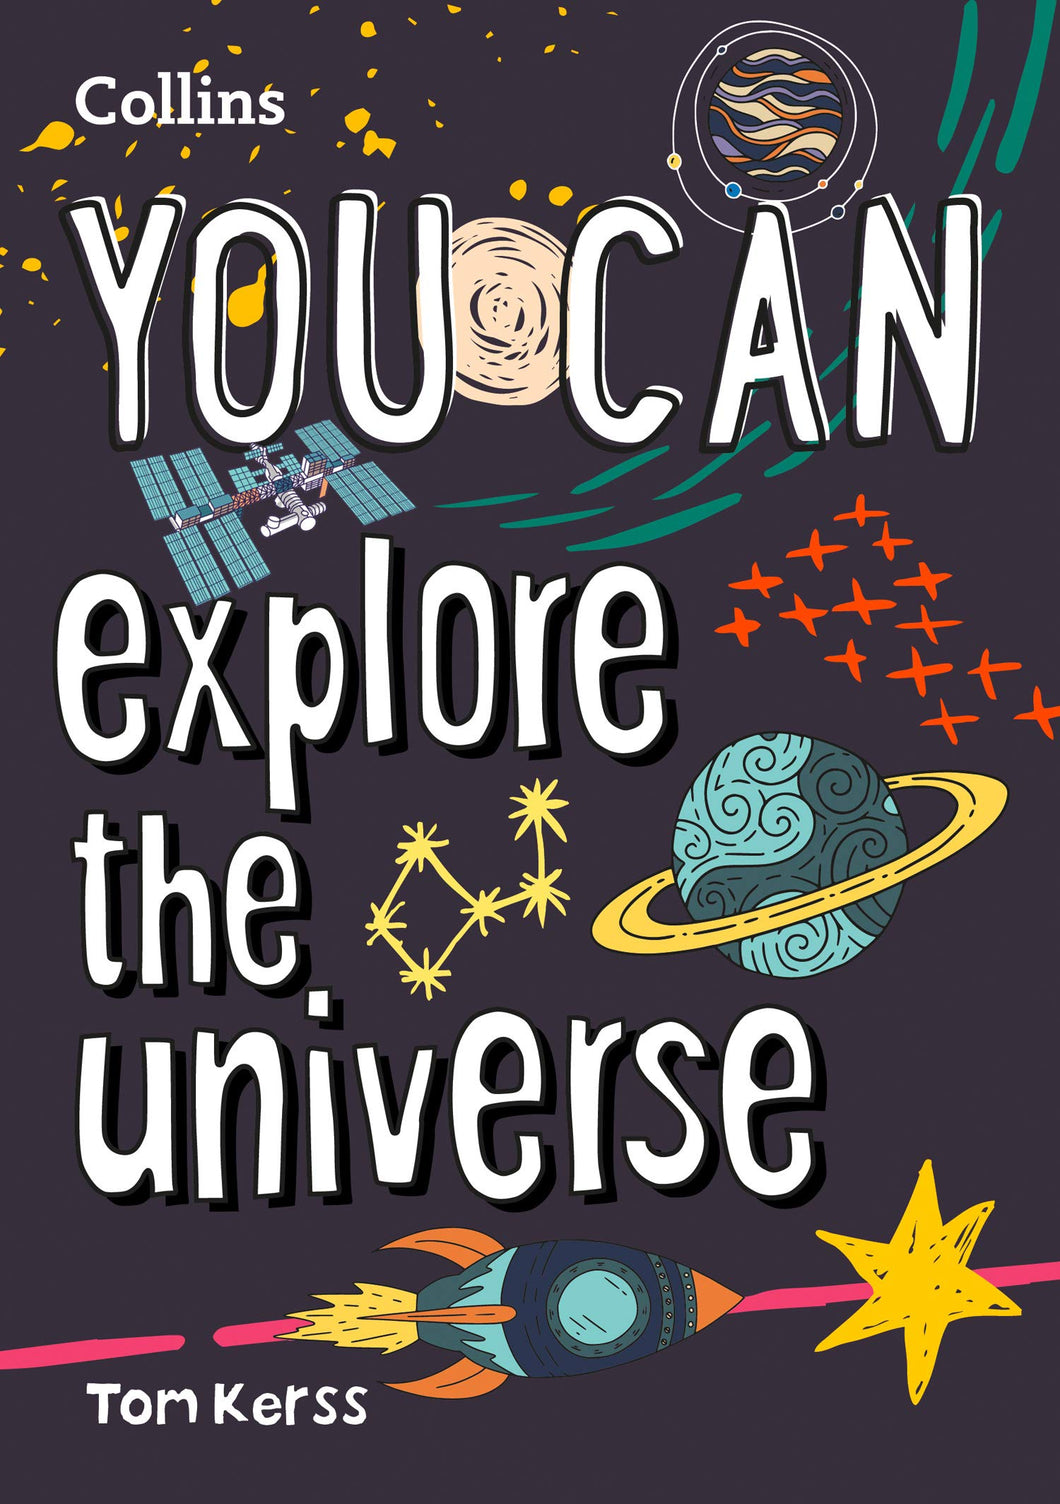 Dark blue book cover with title in white bold letters across whole page. In the background are colour illustrations of planets, rockets, constellations, and the International Space Station. 'Collins' is written in top left, and author name is in bottom left.